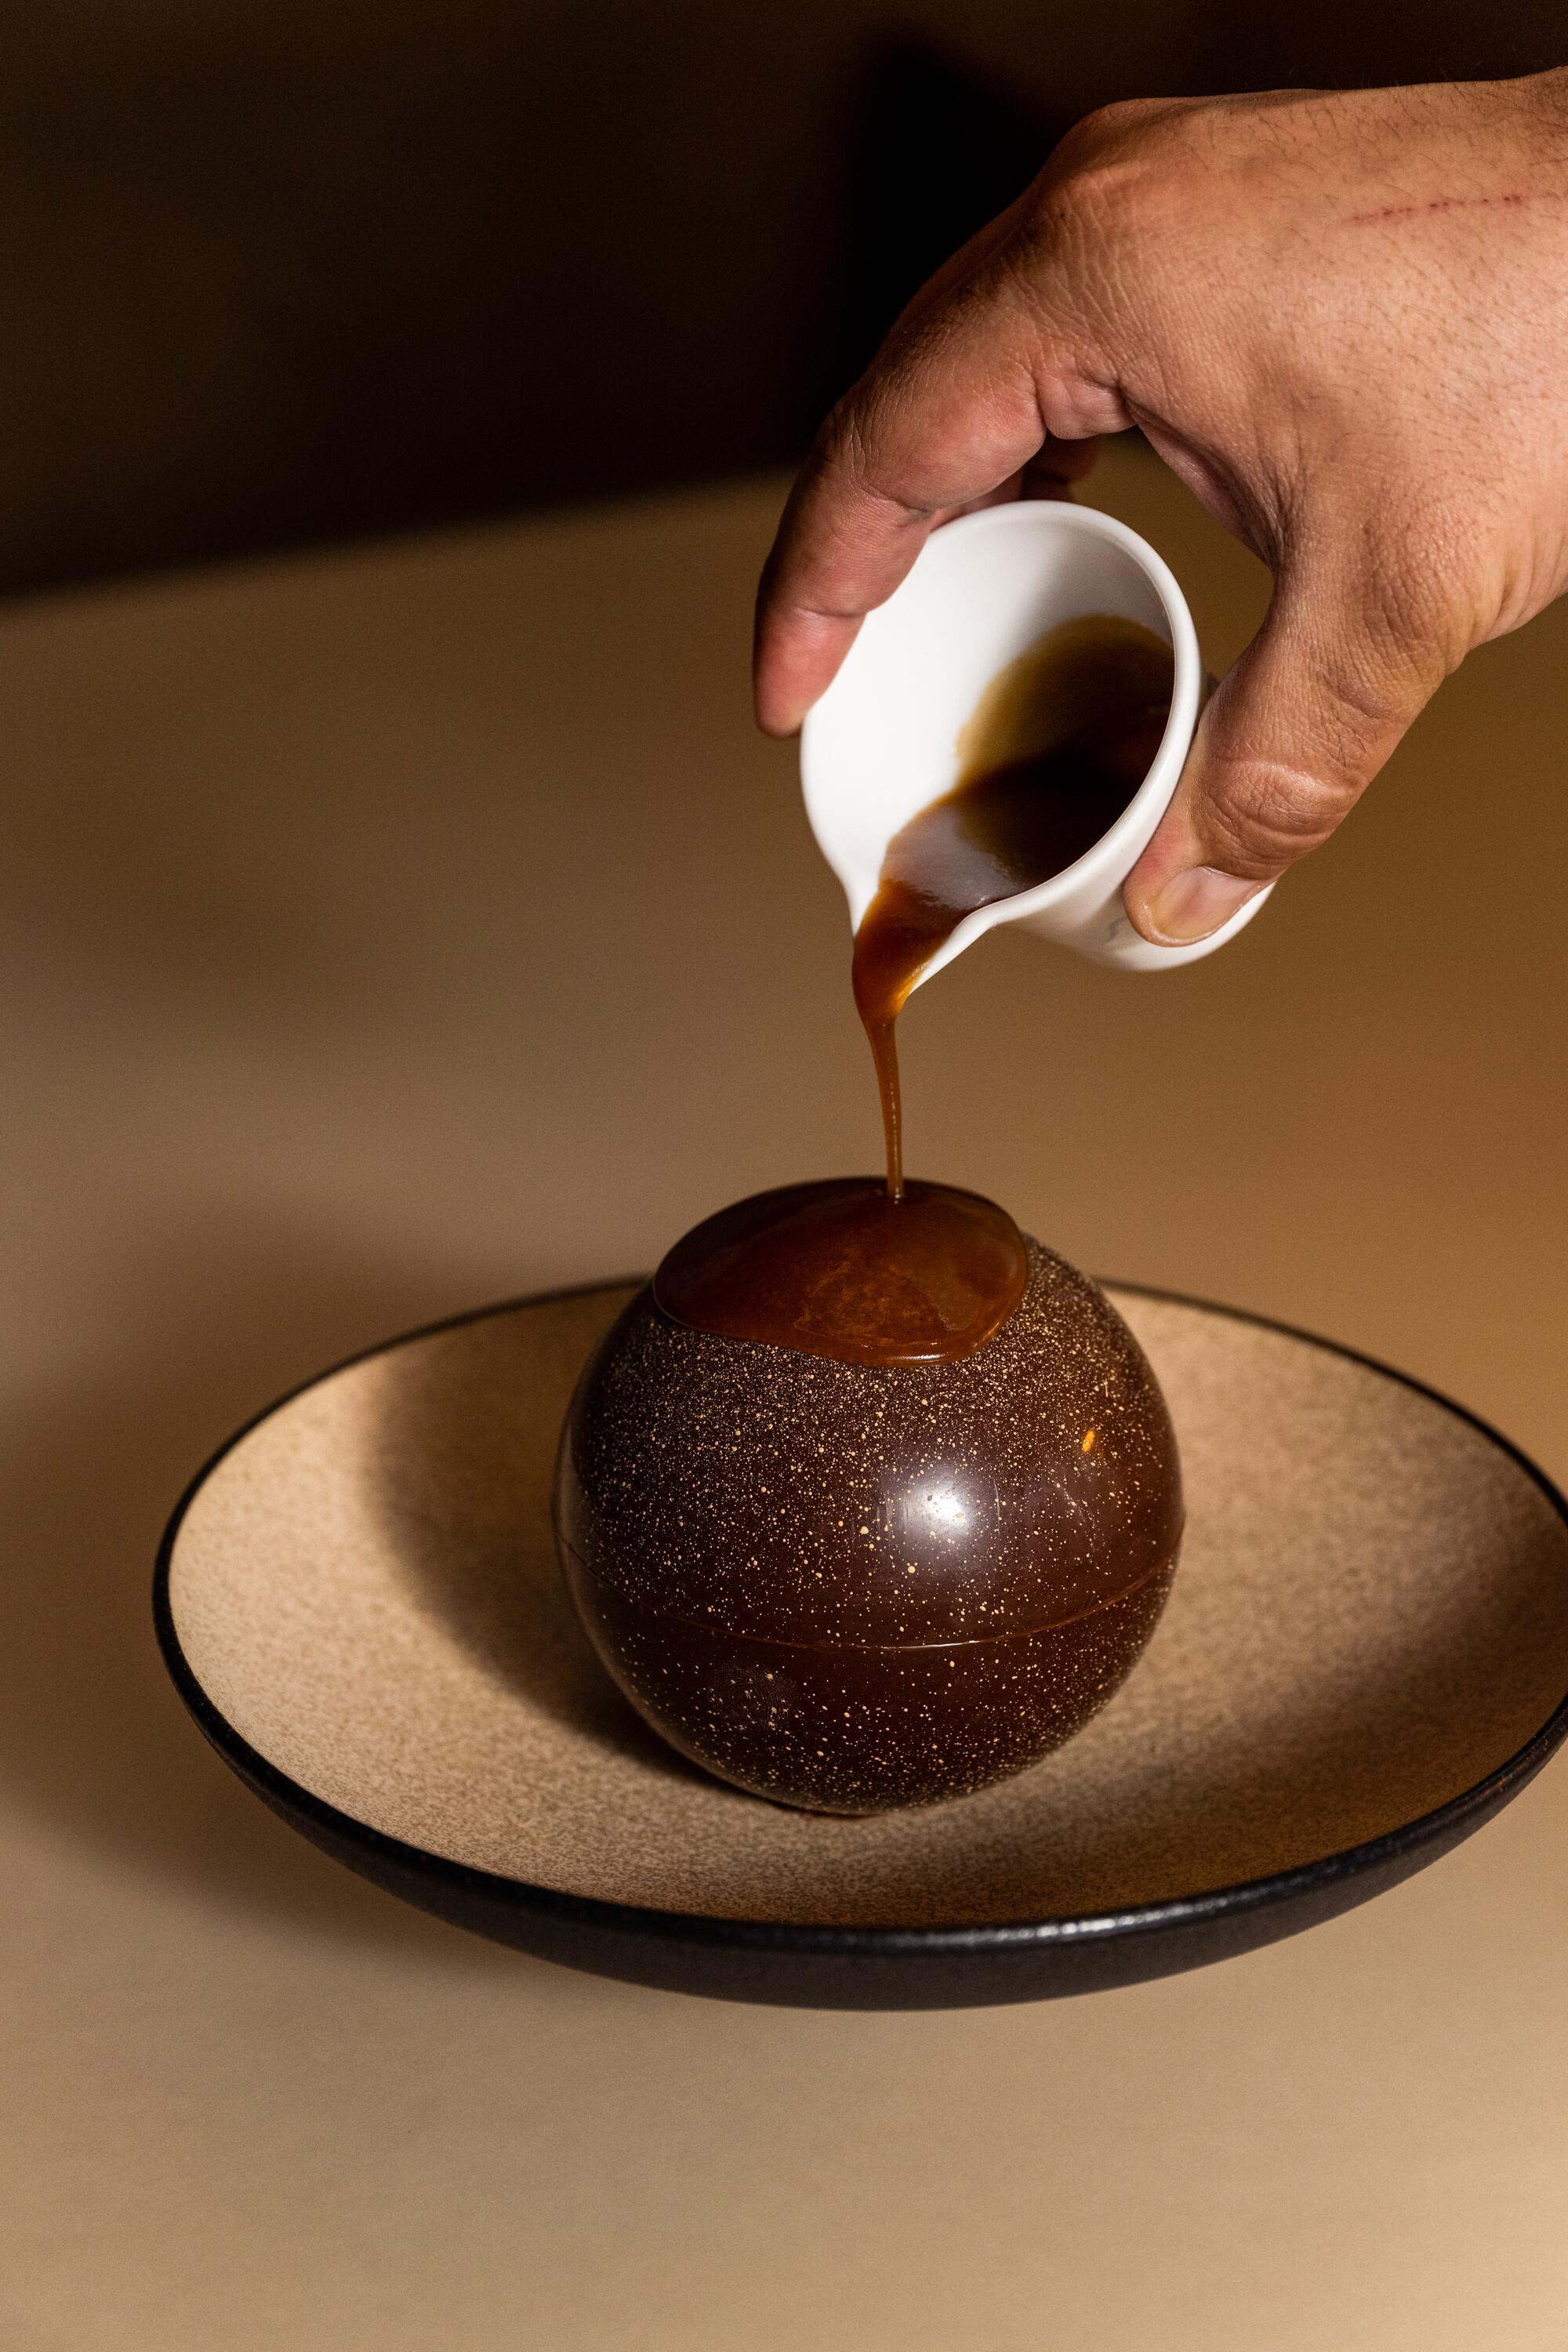 A hand pours caramel over a chocolate sphere